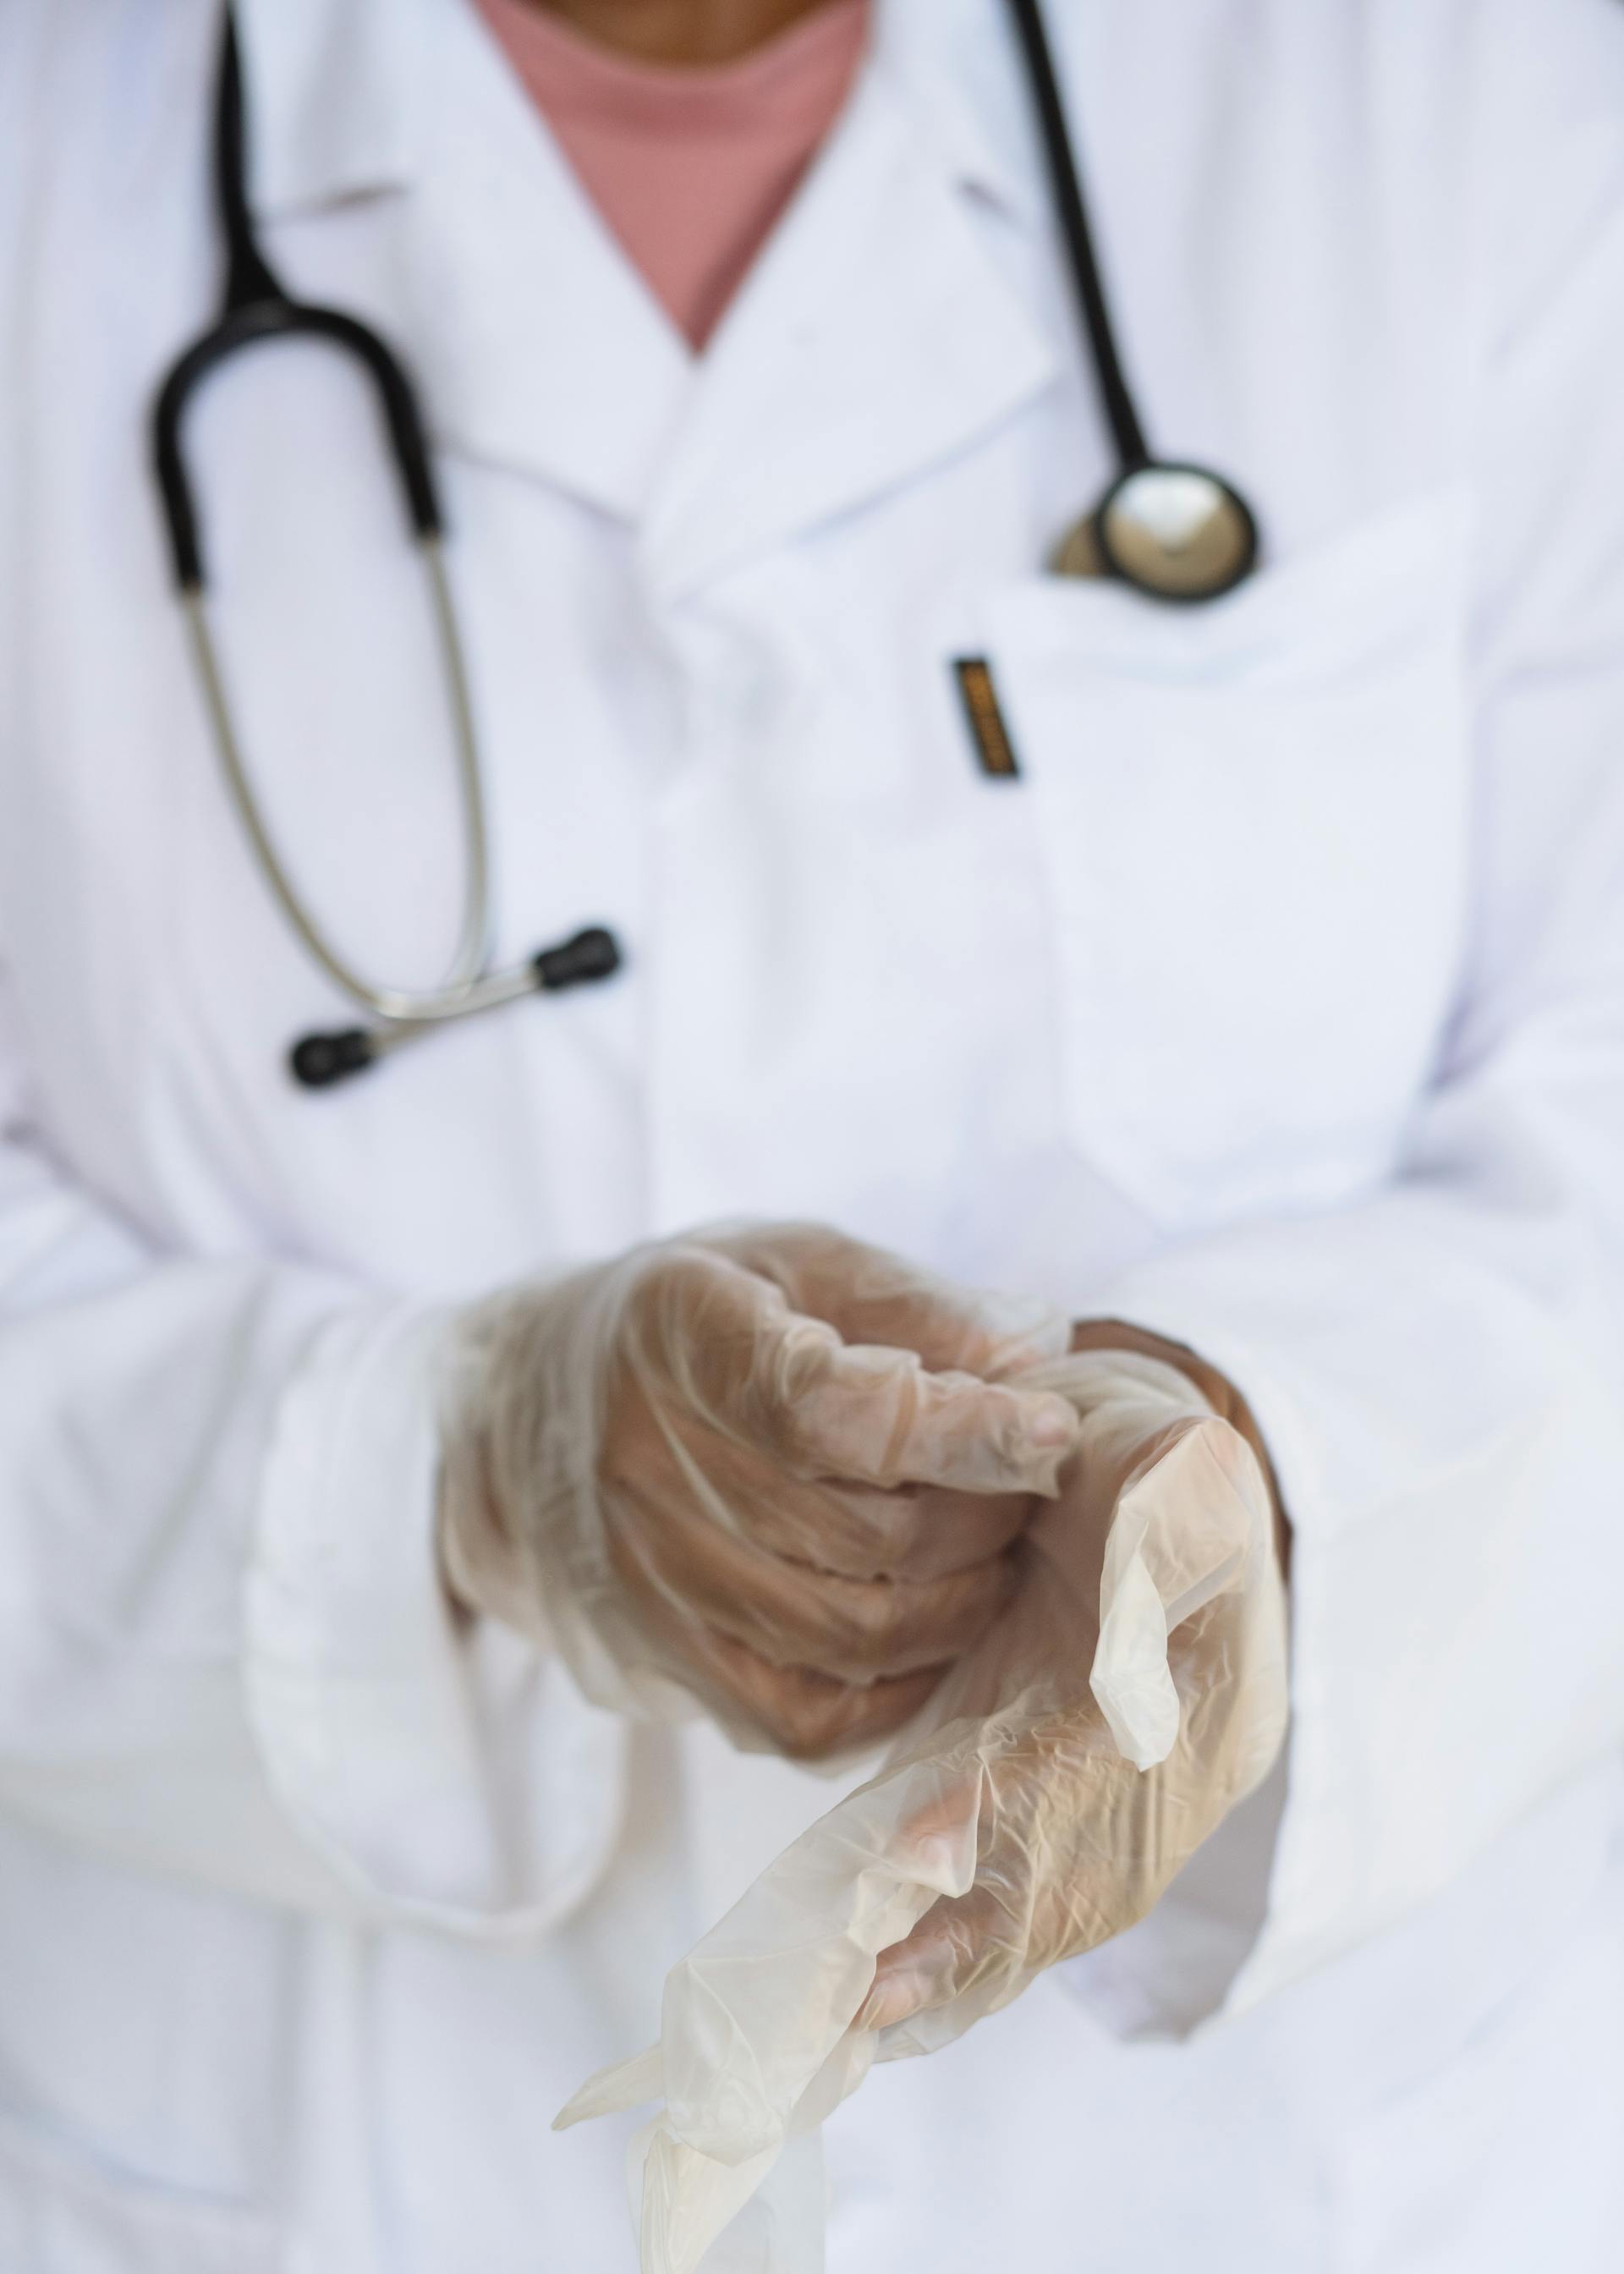 A doctor putting on gloves | Source: Pexels